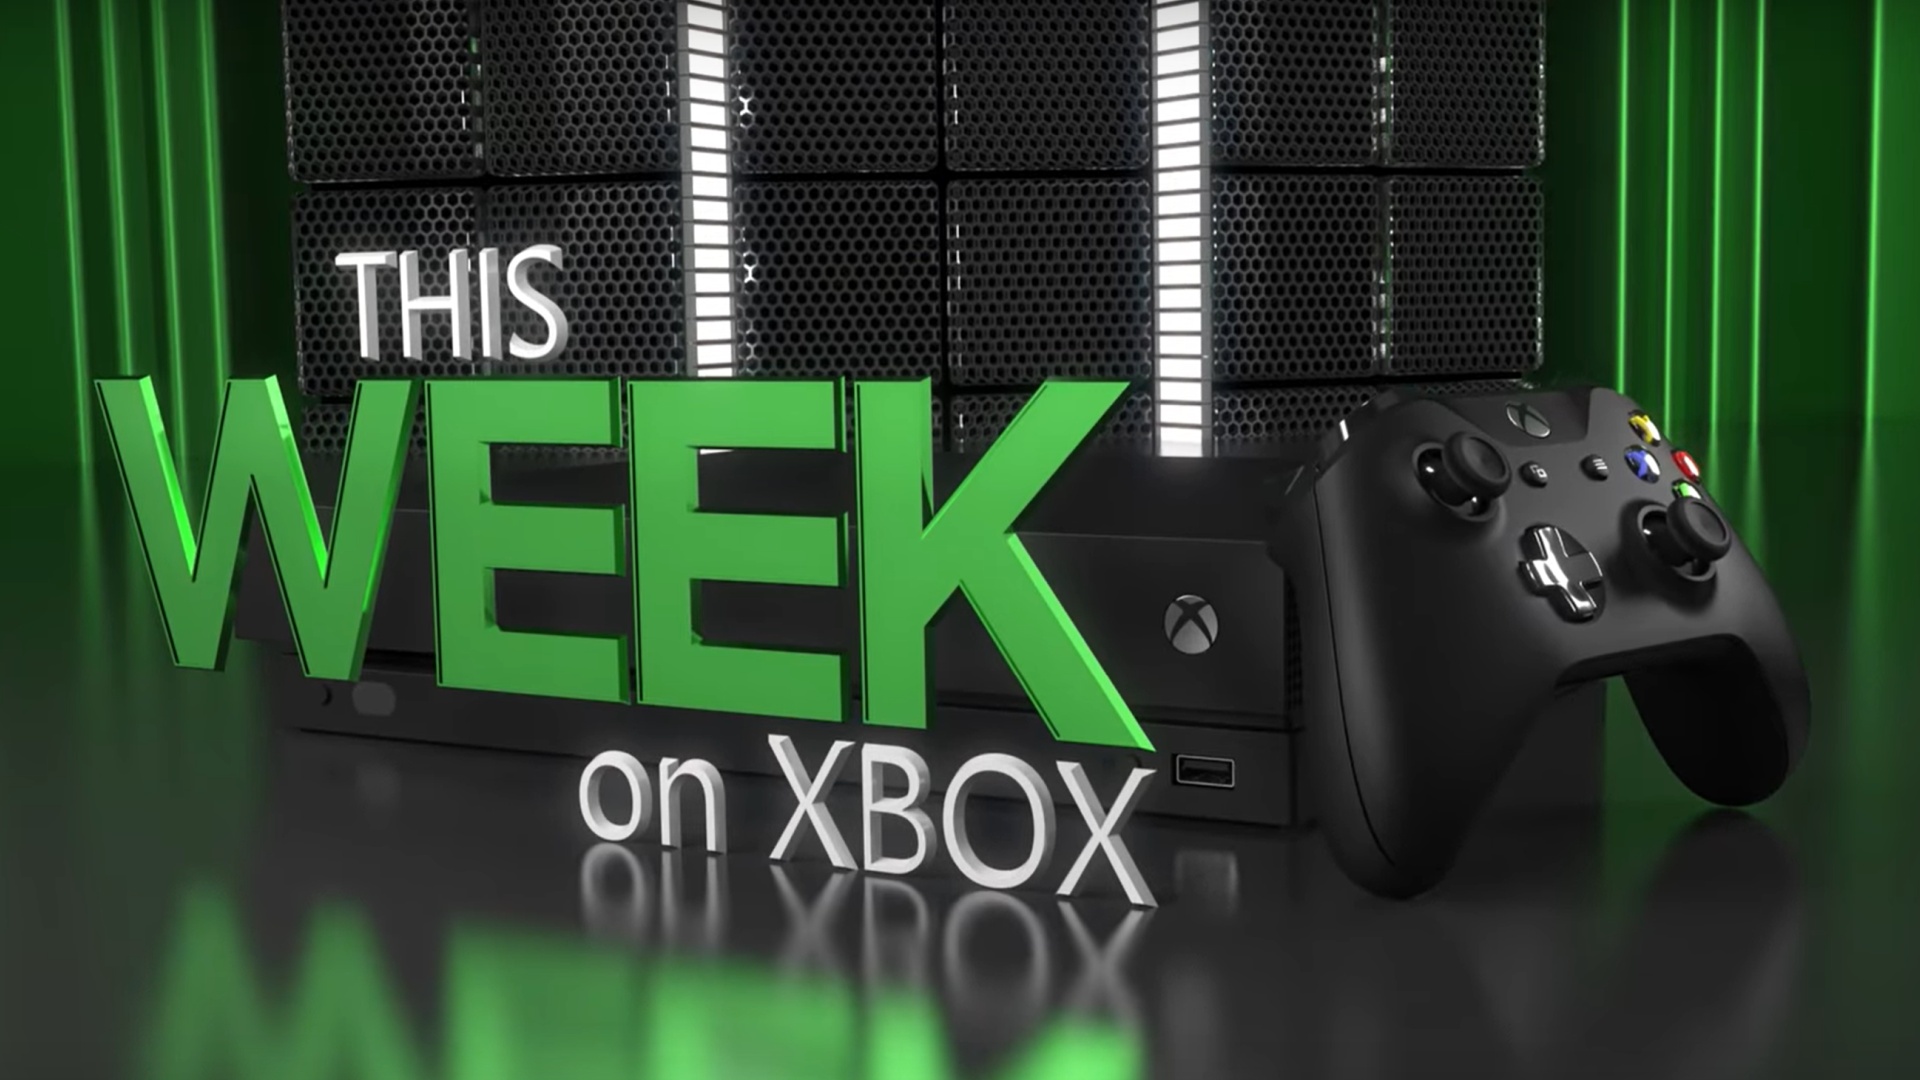 This Week on Xbox - 2020